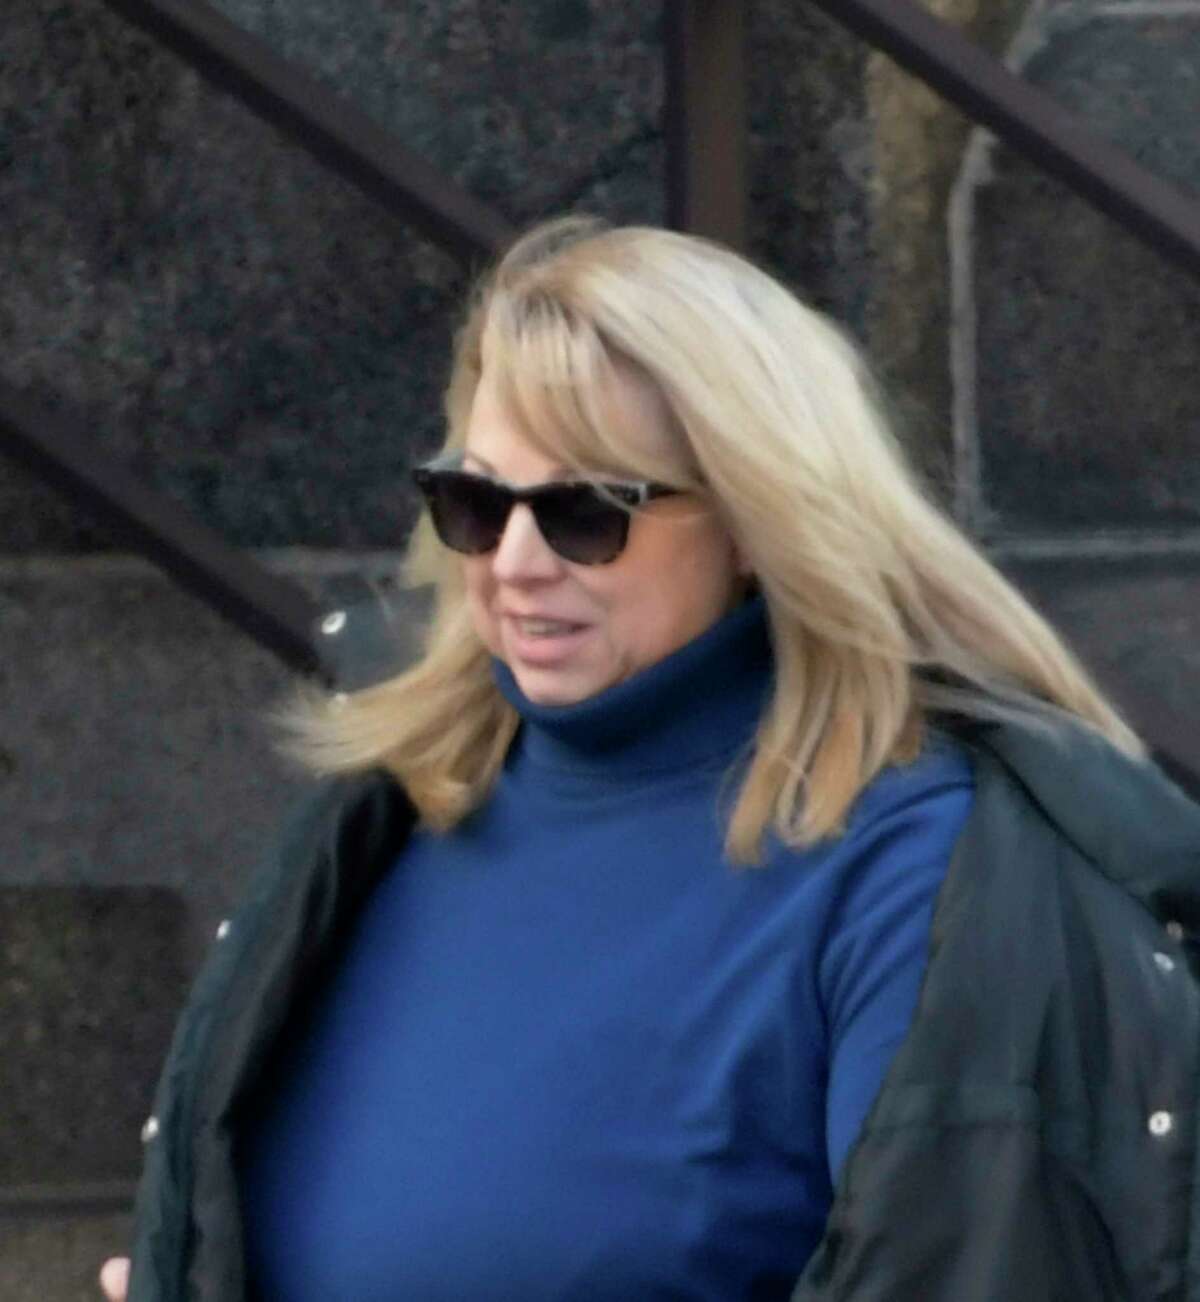 Diane Backis arrives at the Federal Courthouse Monday Nov. 28, 2016 to take a plea deal for alleged embezzlement of $3.1M from the Cargill Company in Albany, N.Y. (Skip Dickstein/Times Union)